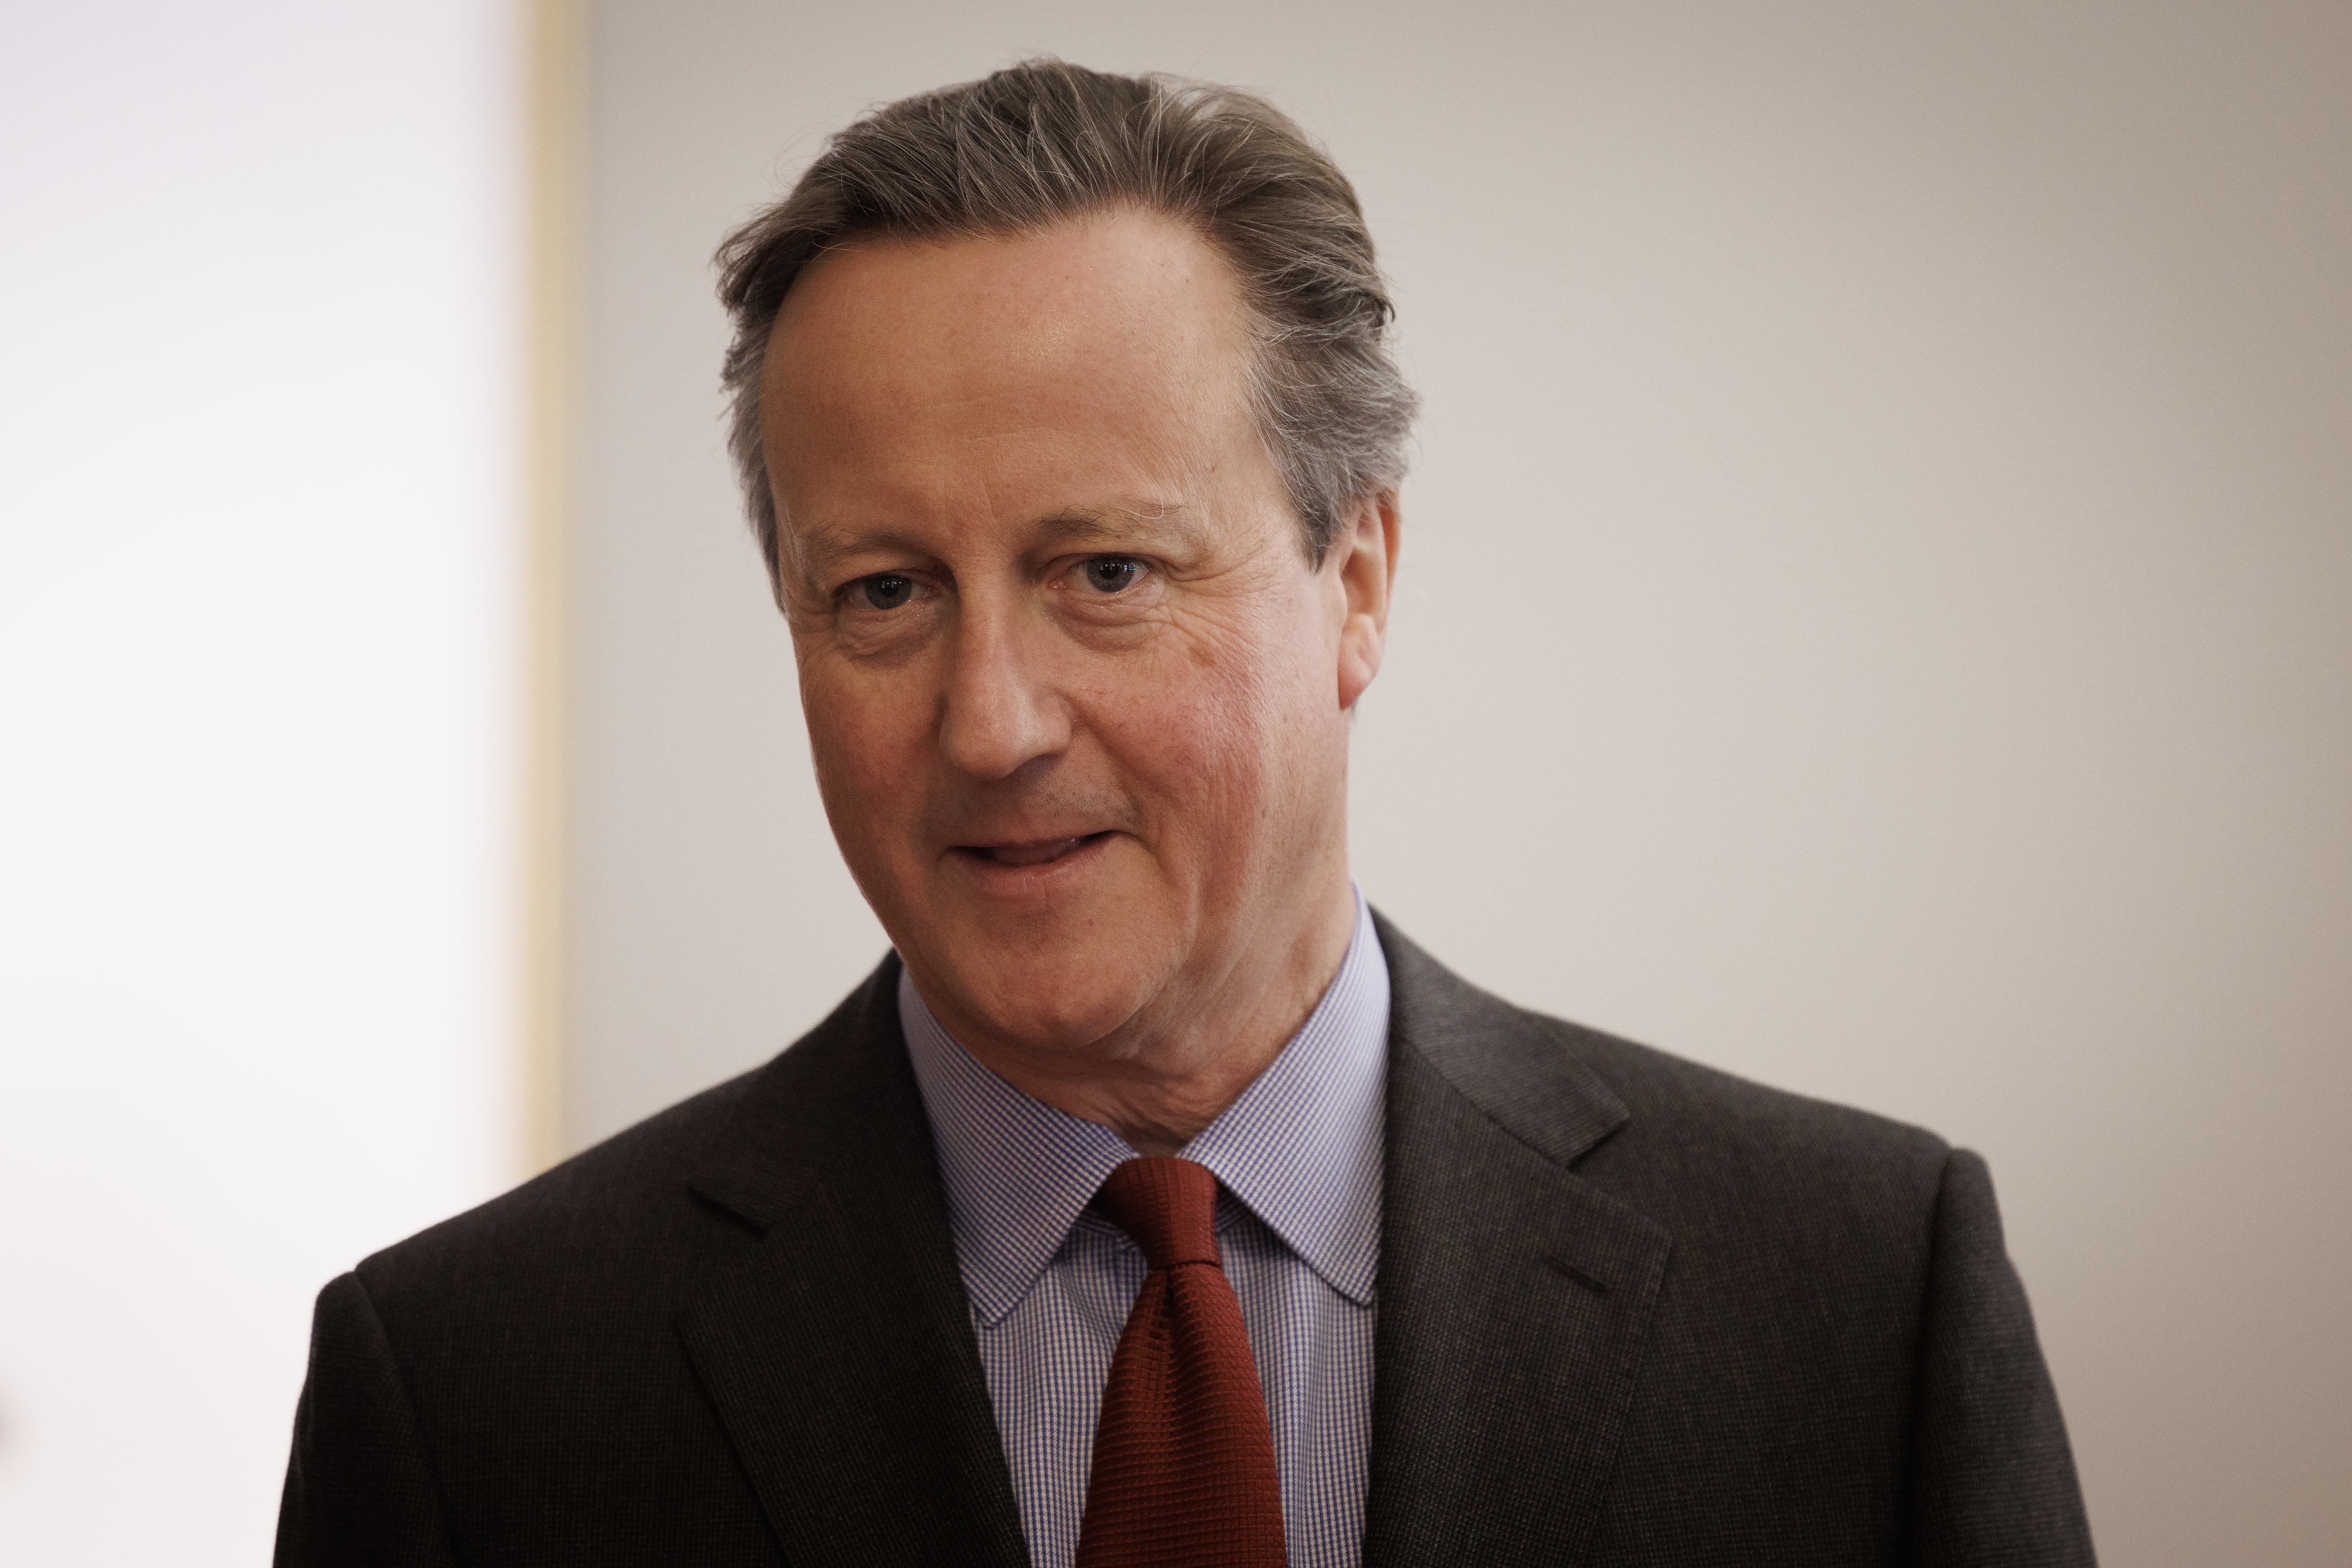 Lord Cameron delivered a stark warning to Israel